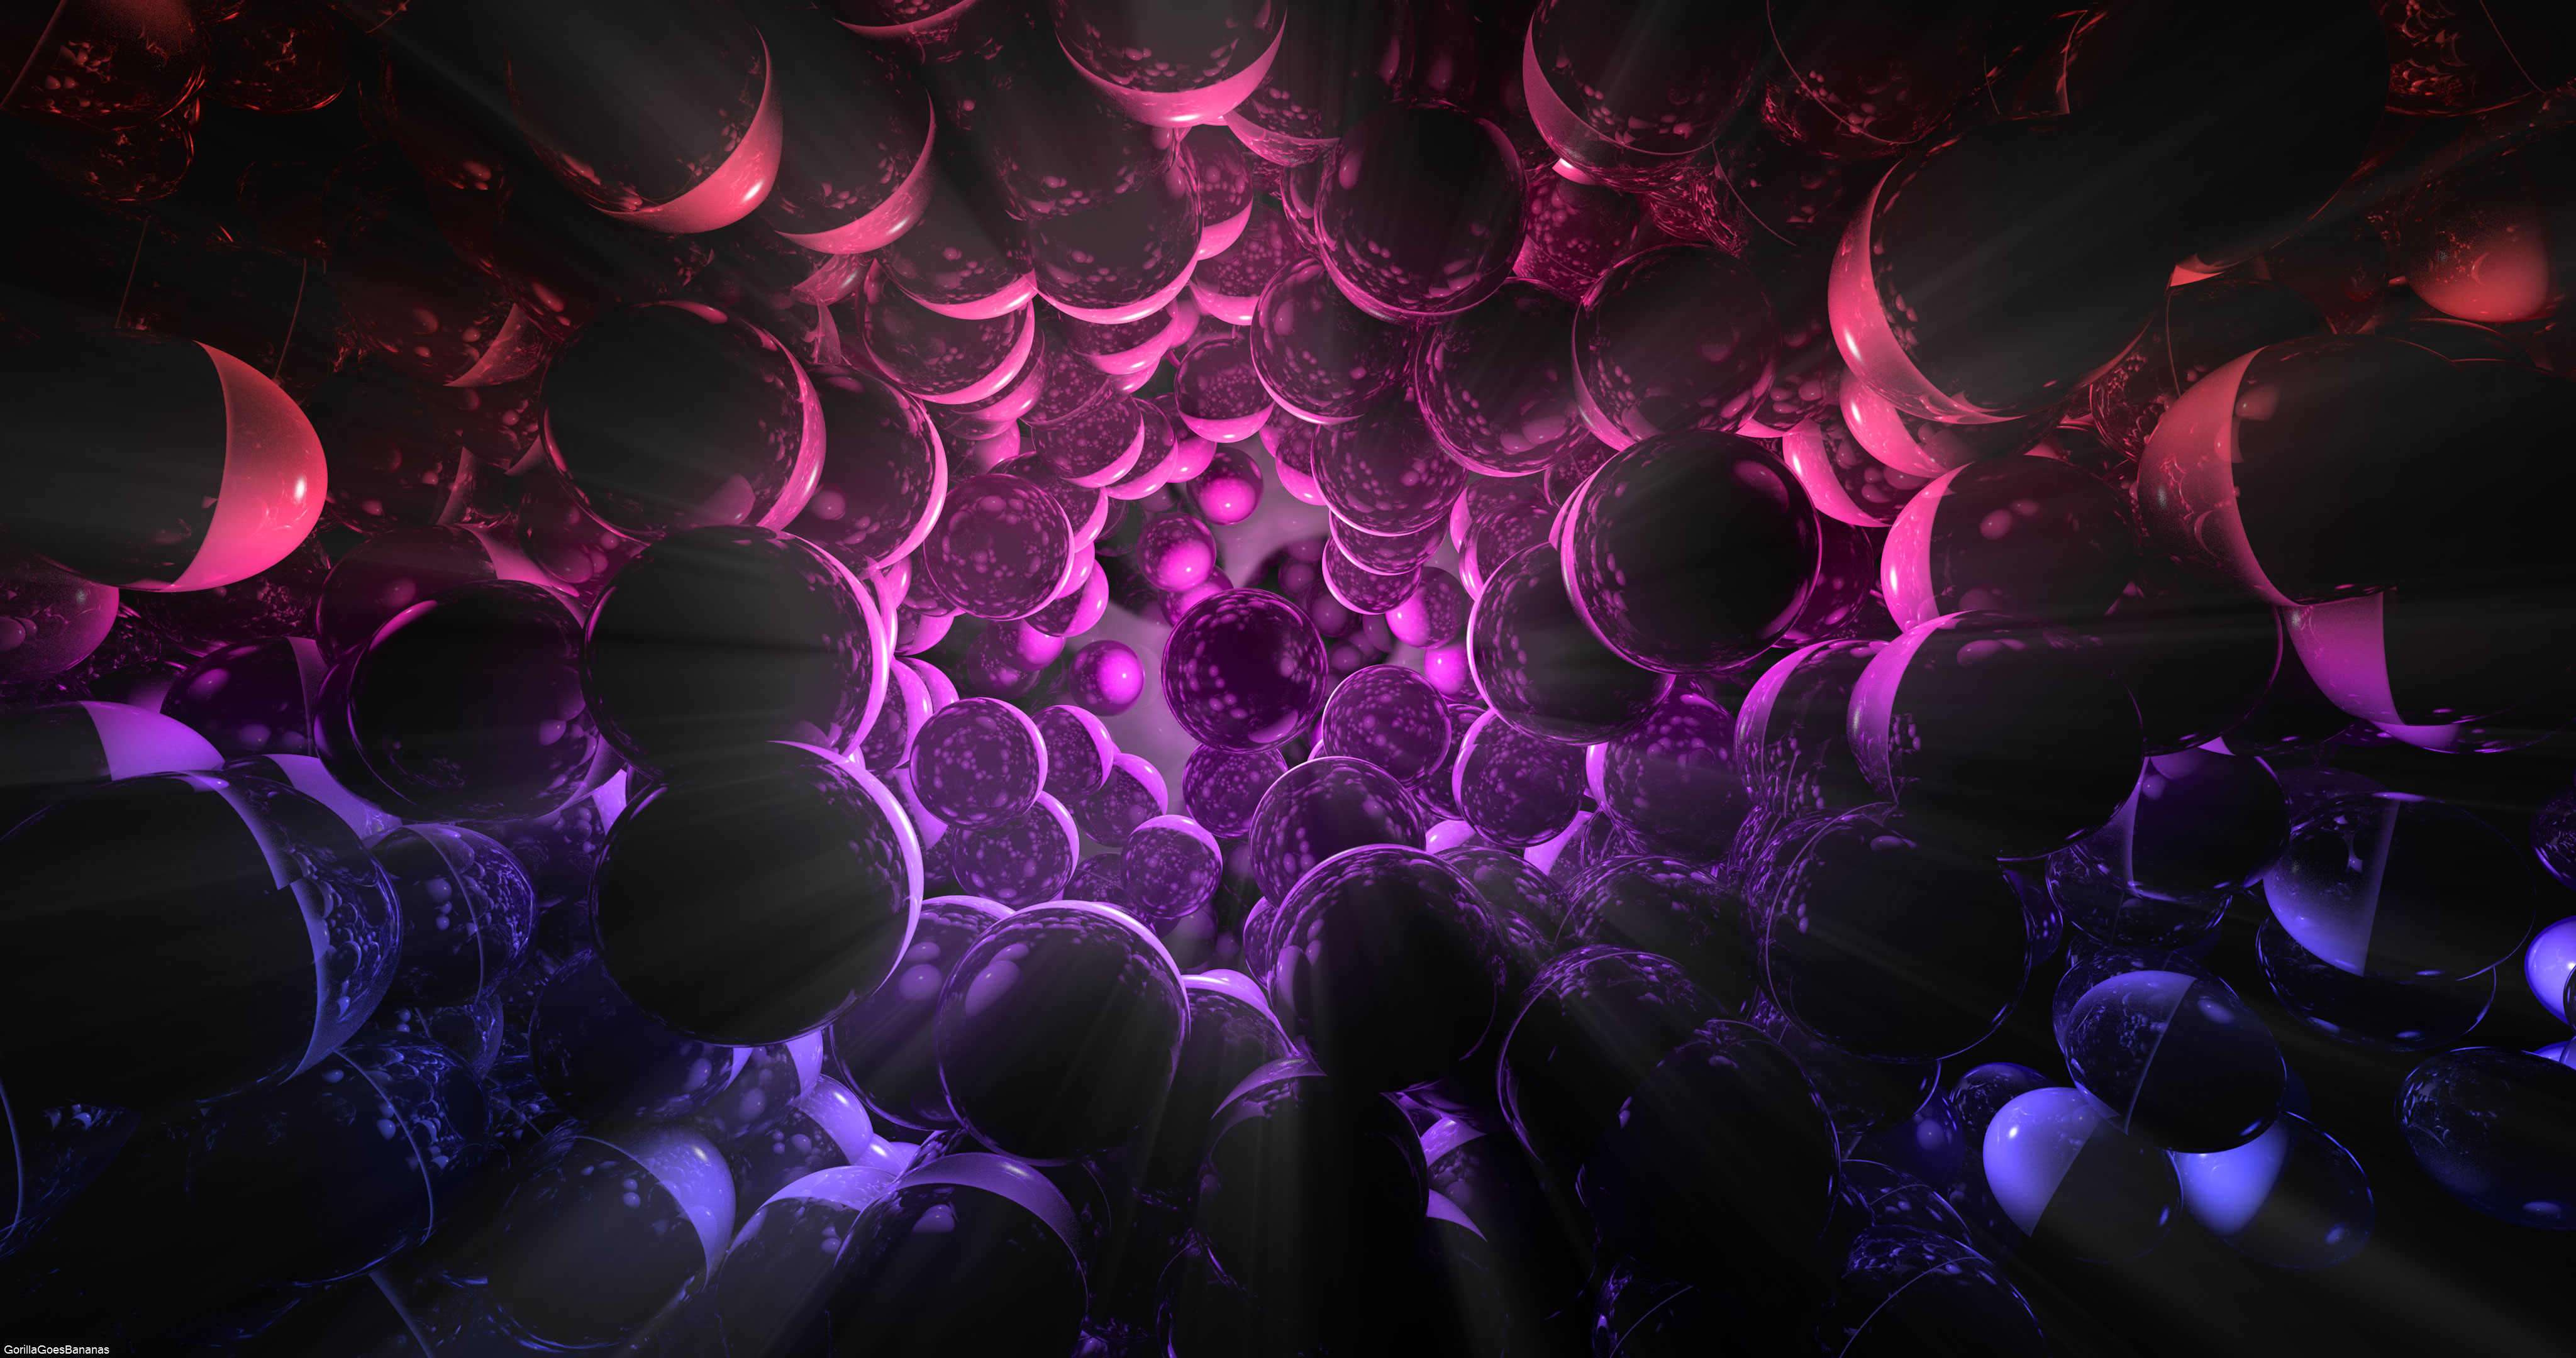 121528 download wallpaper 3d, balls, shining, shine, light, sphere, spheres screensavers and pictures for free